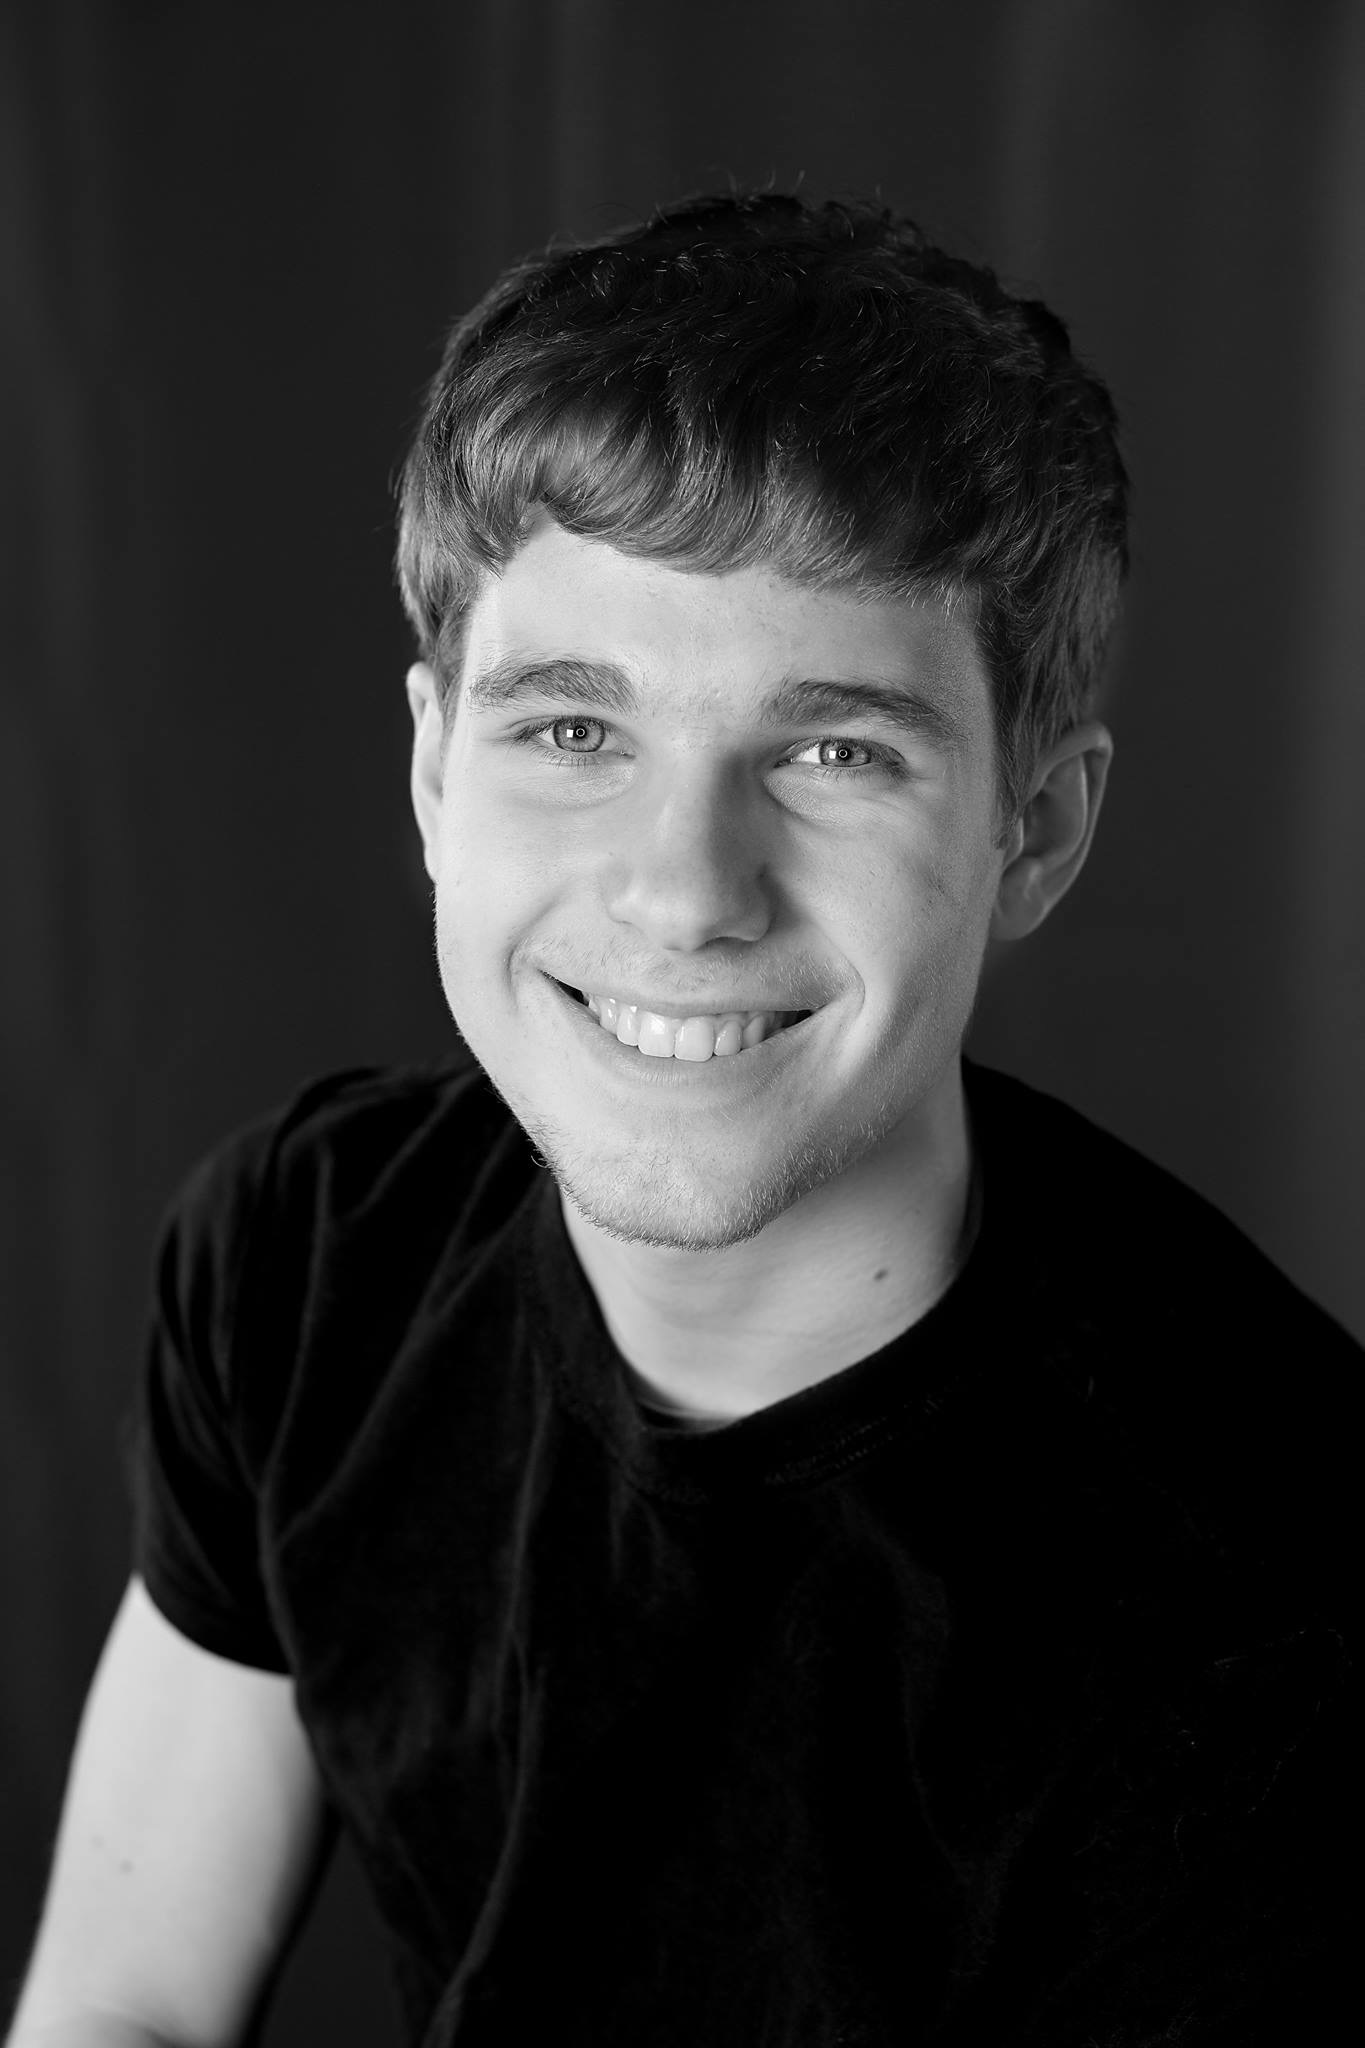 Senior Cast Member Colin Thomas:
Colin plays the role of Roscoe Dexter in 